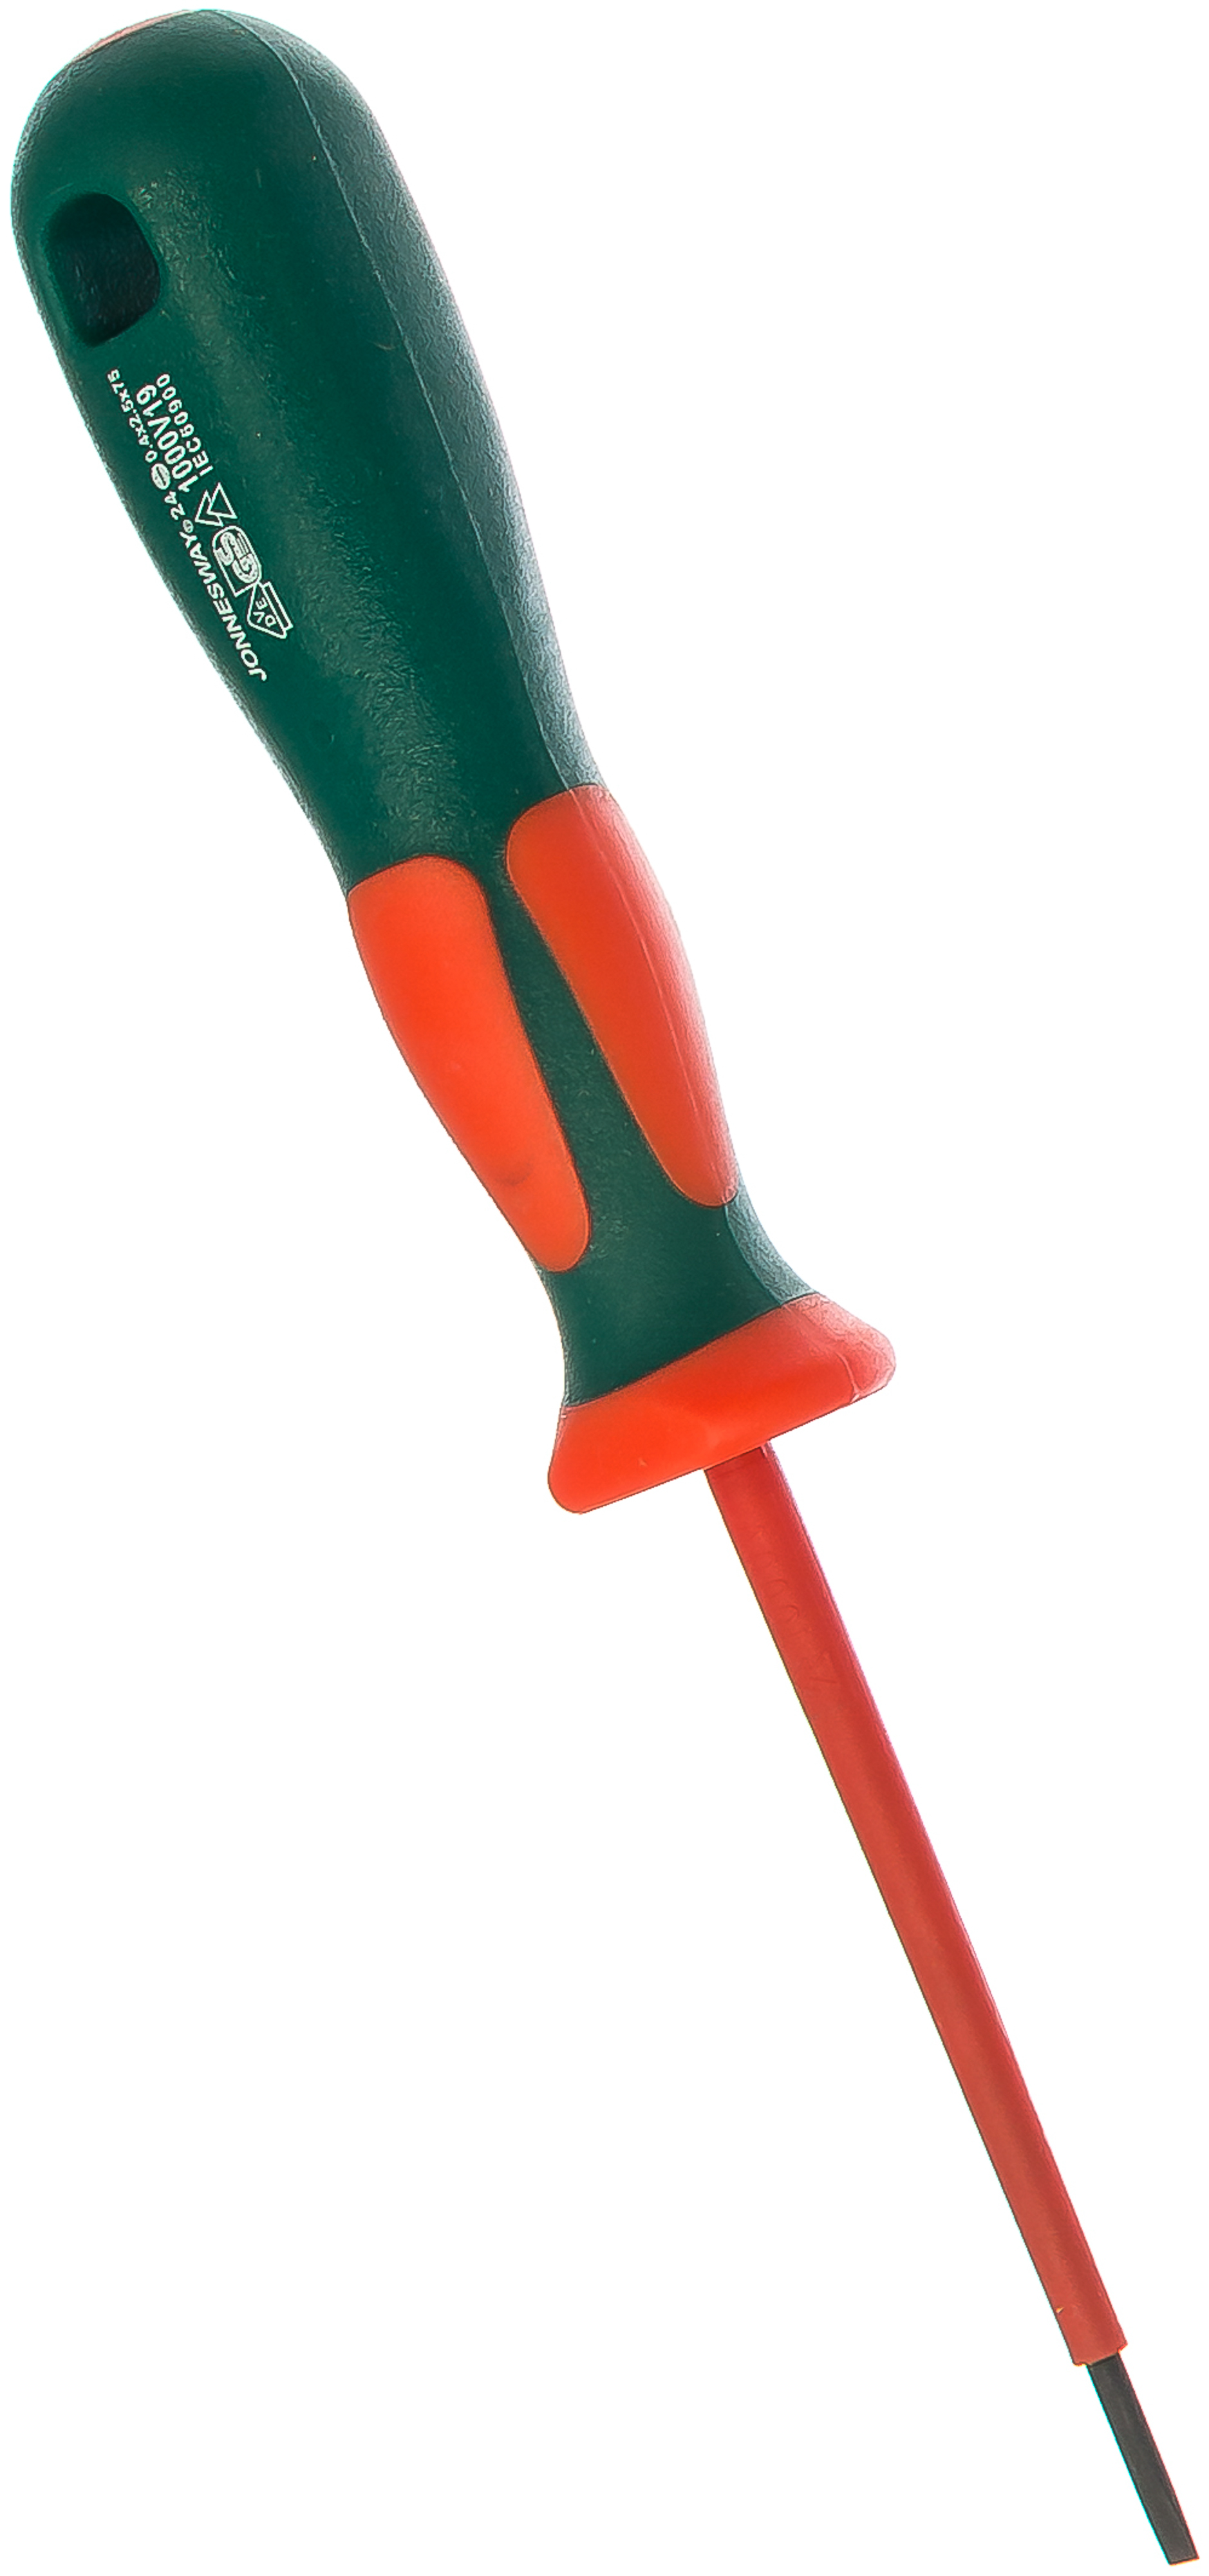 1000V INSULATED SCREWDRIVERS GS&VDE APPROVED 8.0X175MM DV13S8175 - Click Image to Close